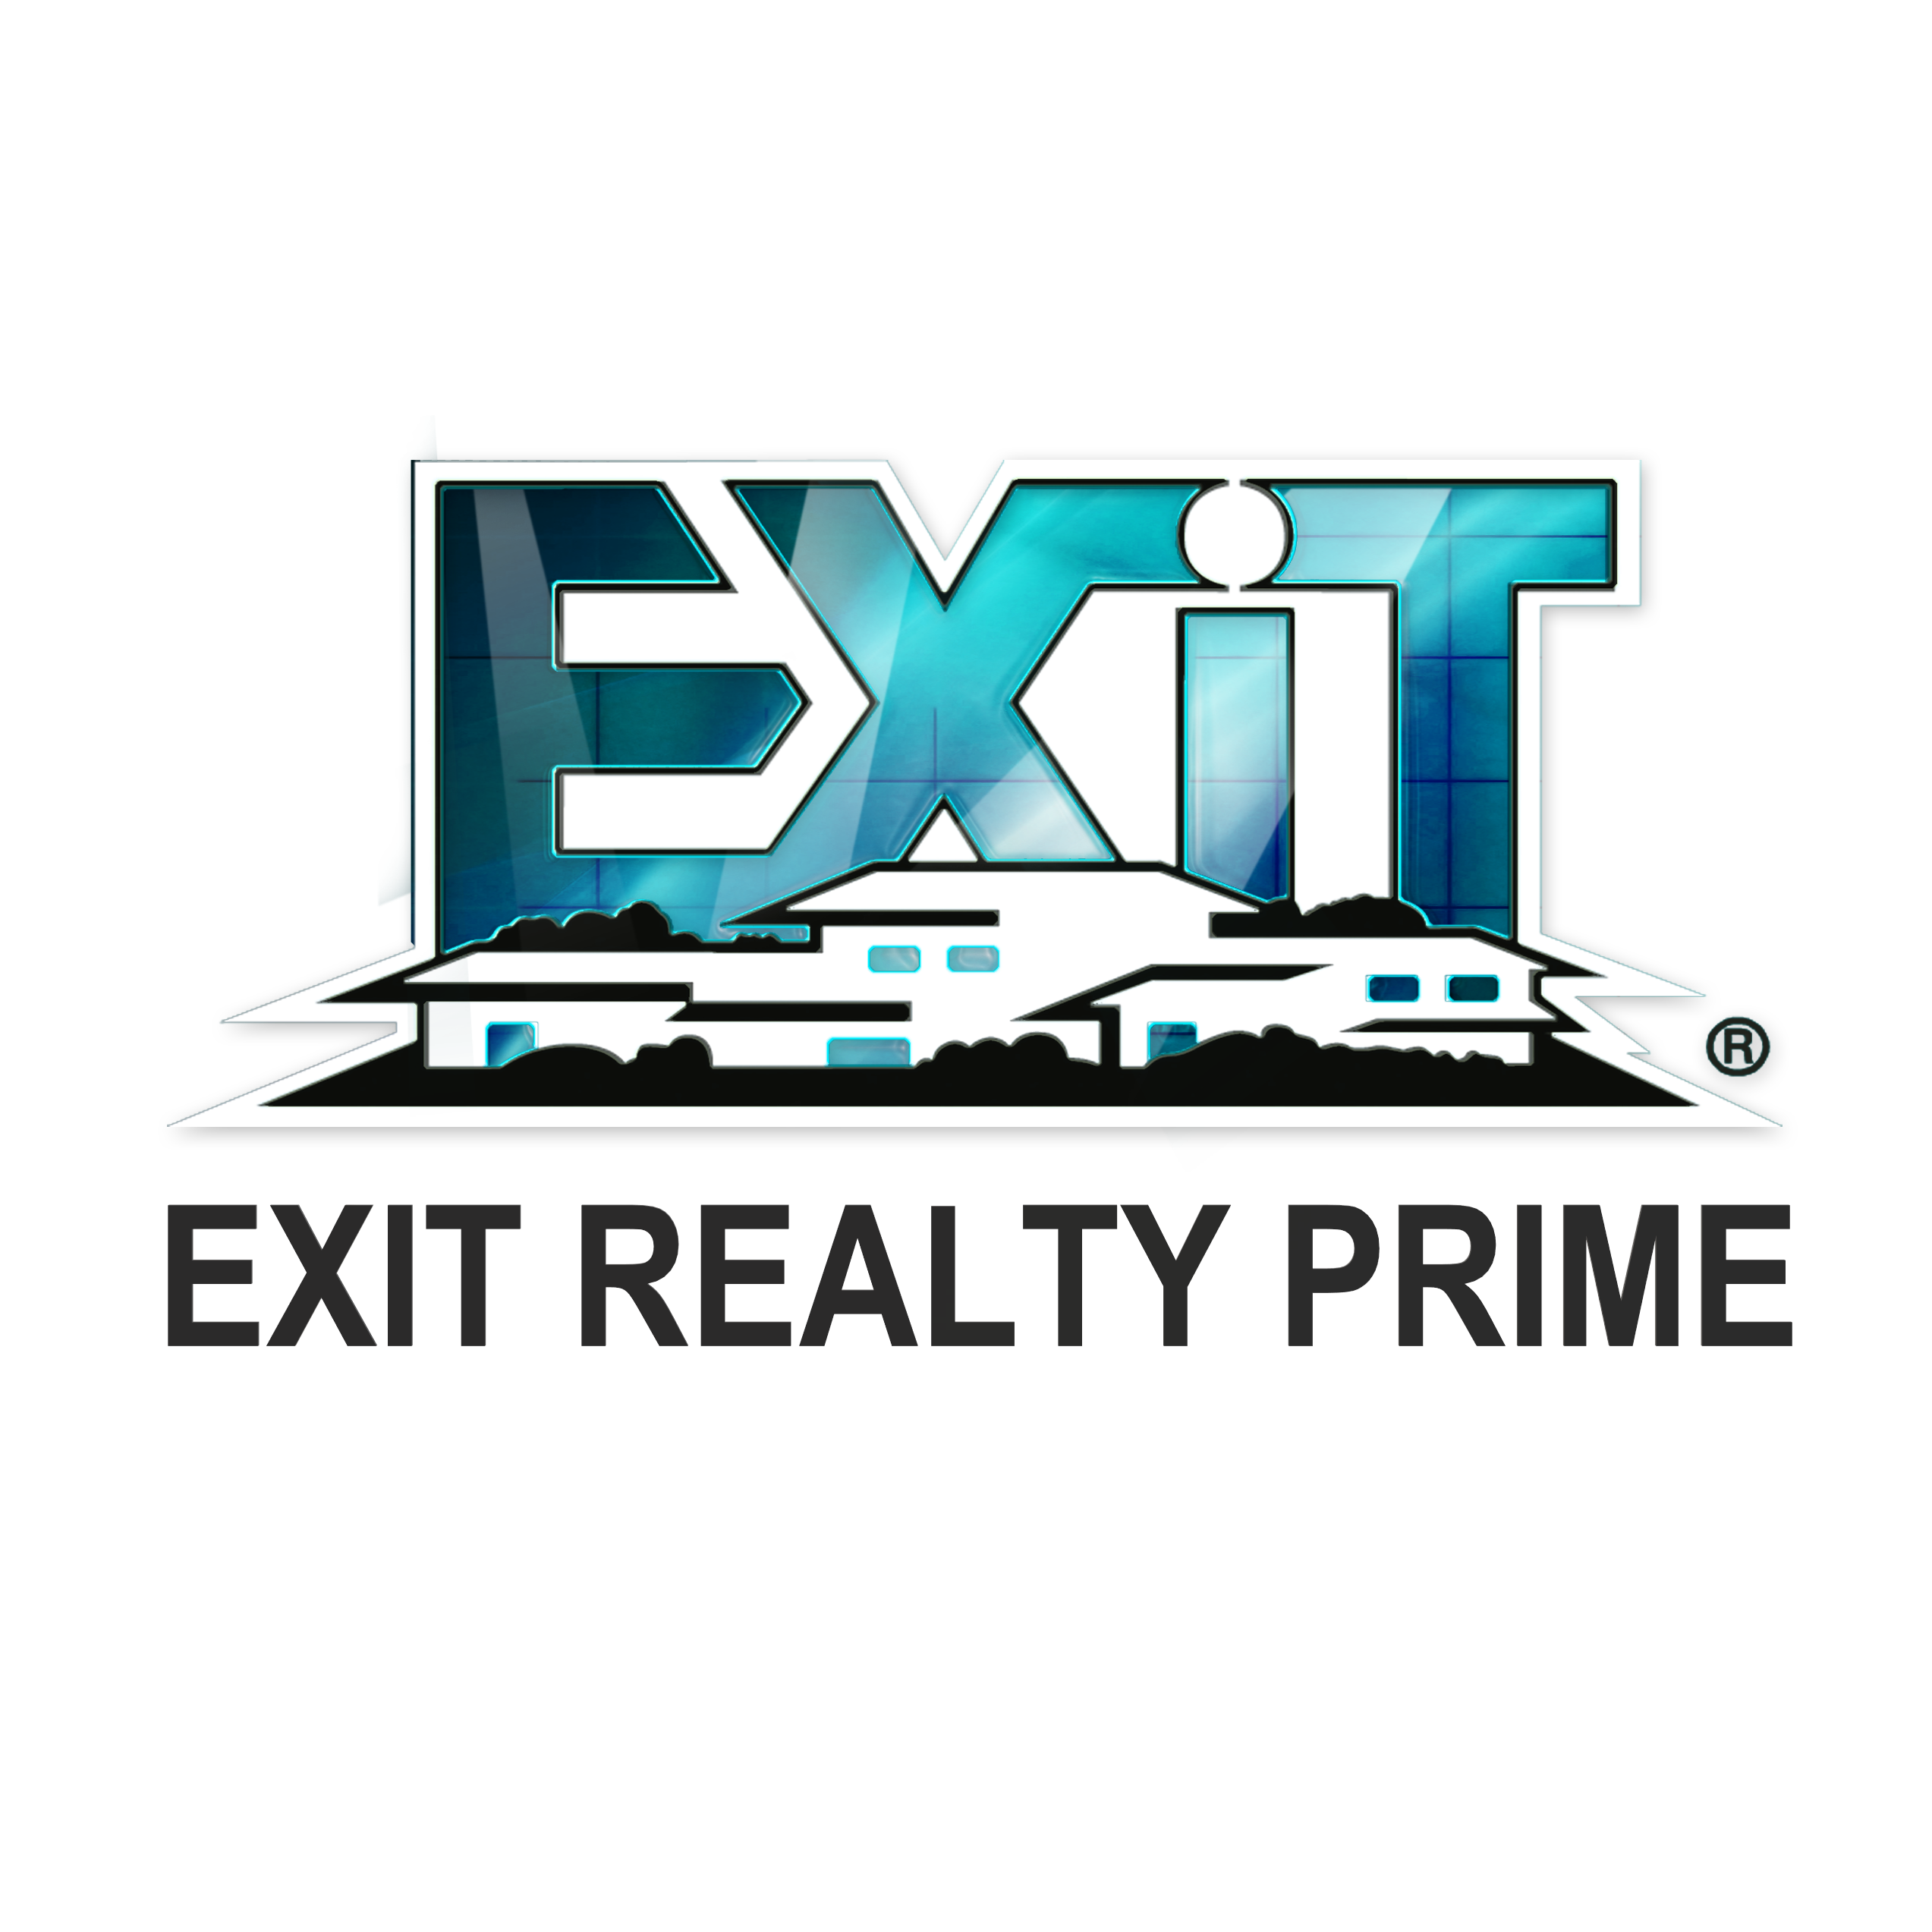 EXIT realty prime - Hollis, NY 11423 - (631)536-5489 | ShowMeLocal.com